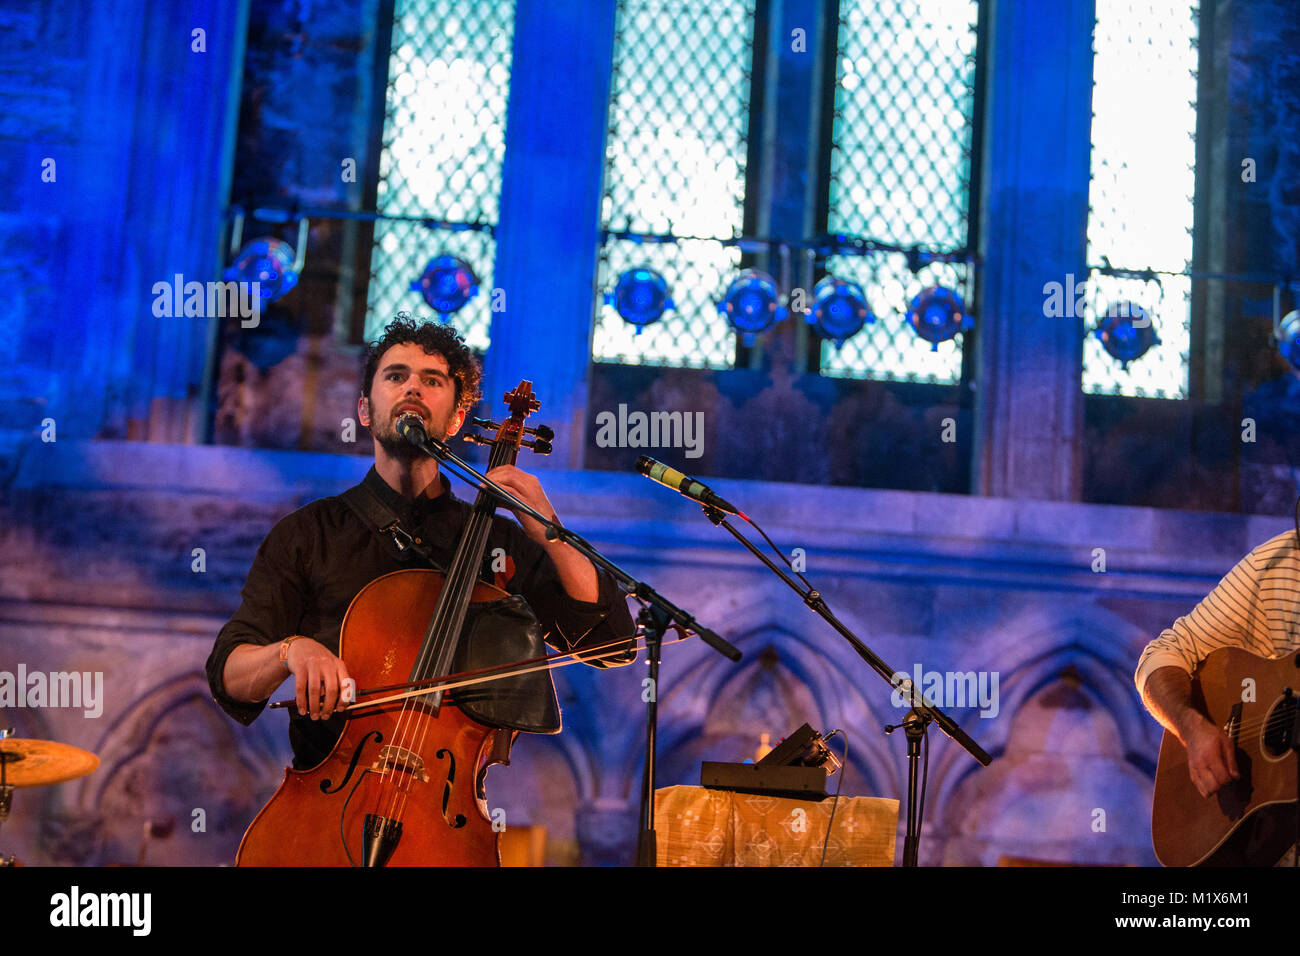 Norway, Bergen – June 14, 2017. The American progressive folk duo Tall Heights performs a live during the Norwegian music festival Bergenfest 2017 in Bergen. Here singer and cellist Paul Wright is seen live on stage. Stock Photo